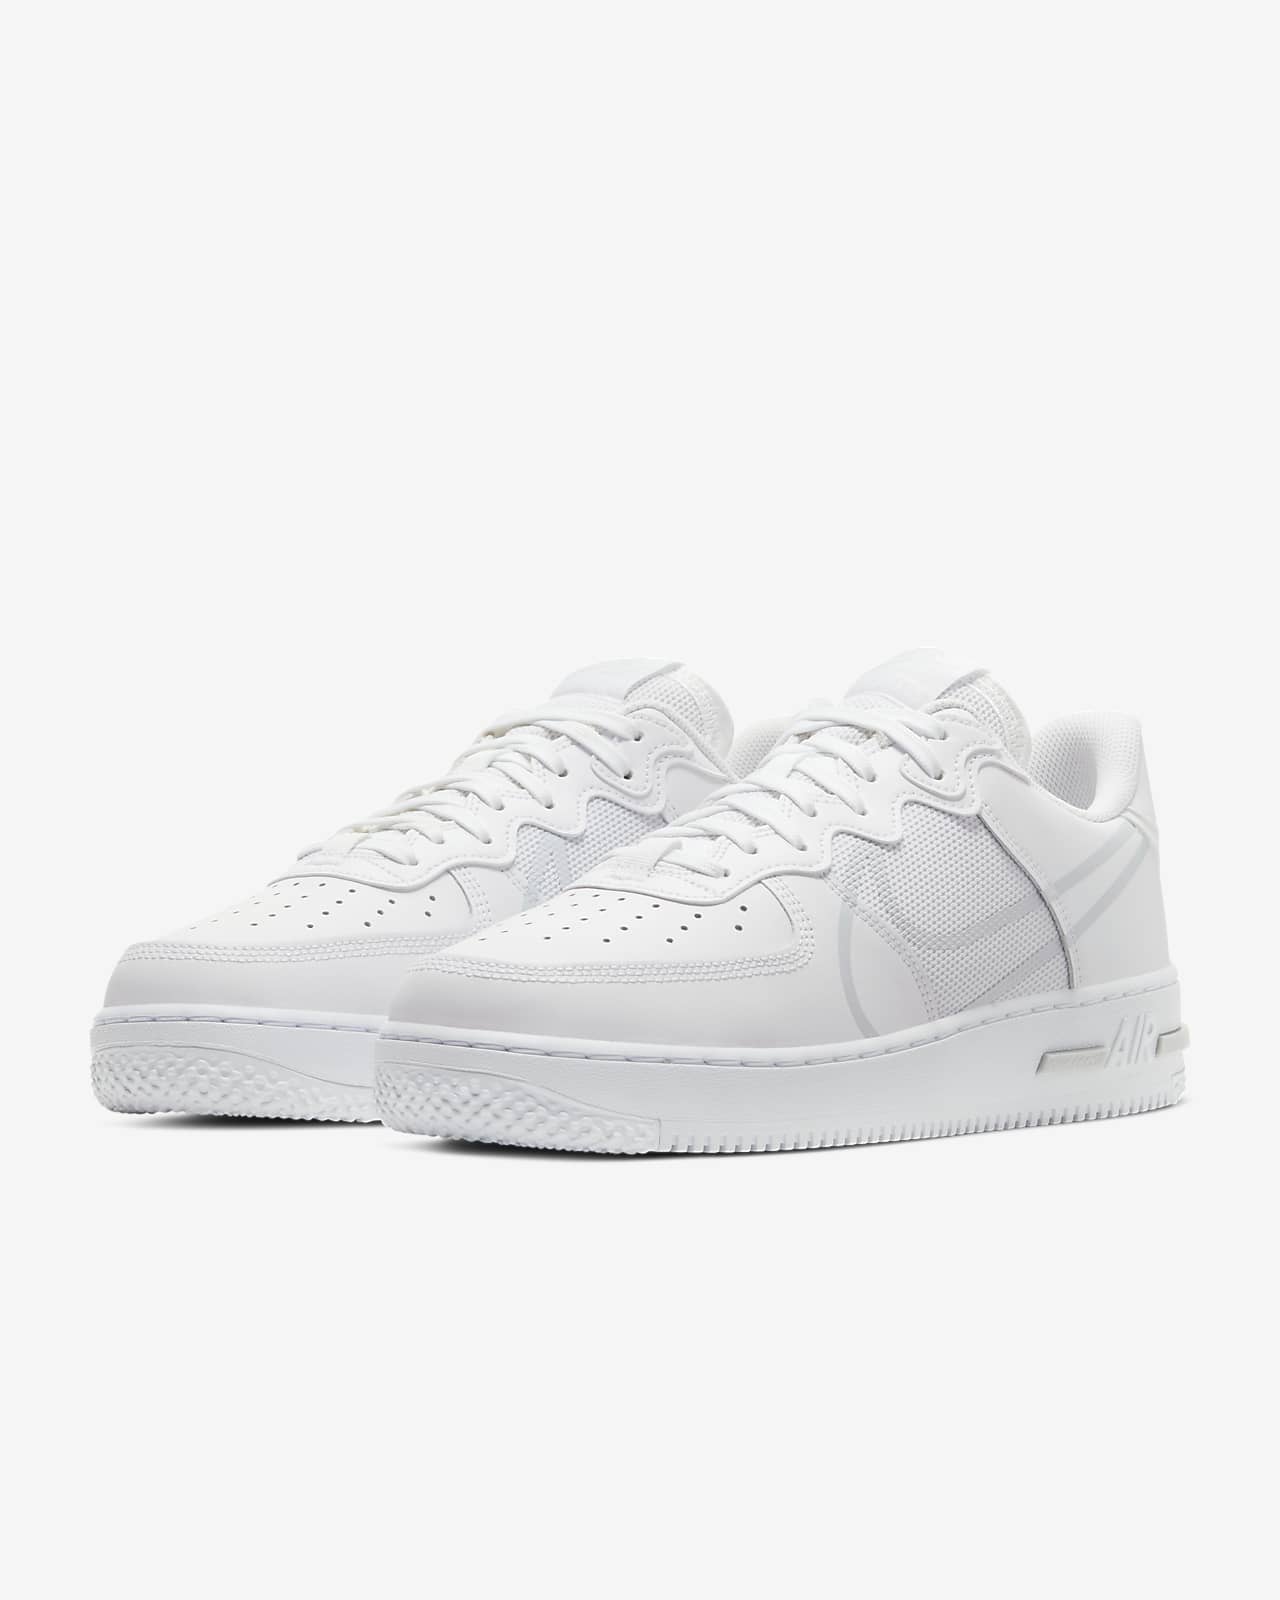 Buy Nike Air Force Blancos Hombre In Stock